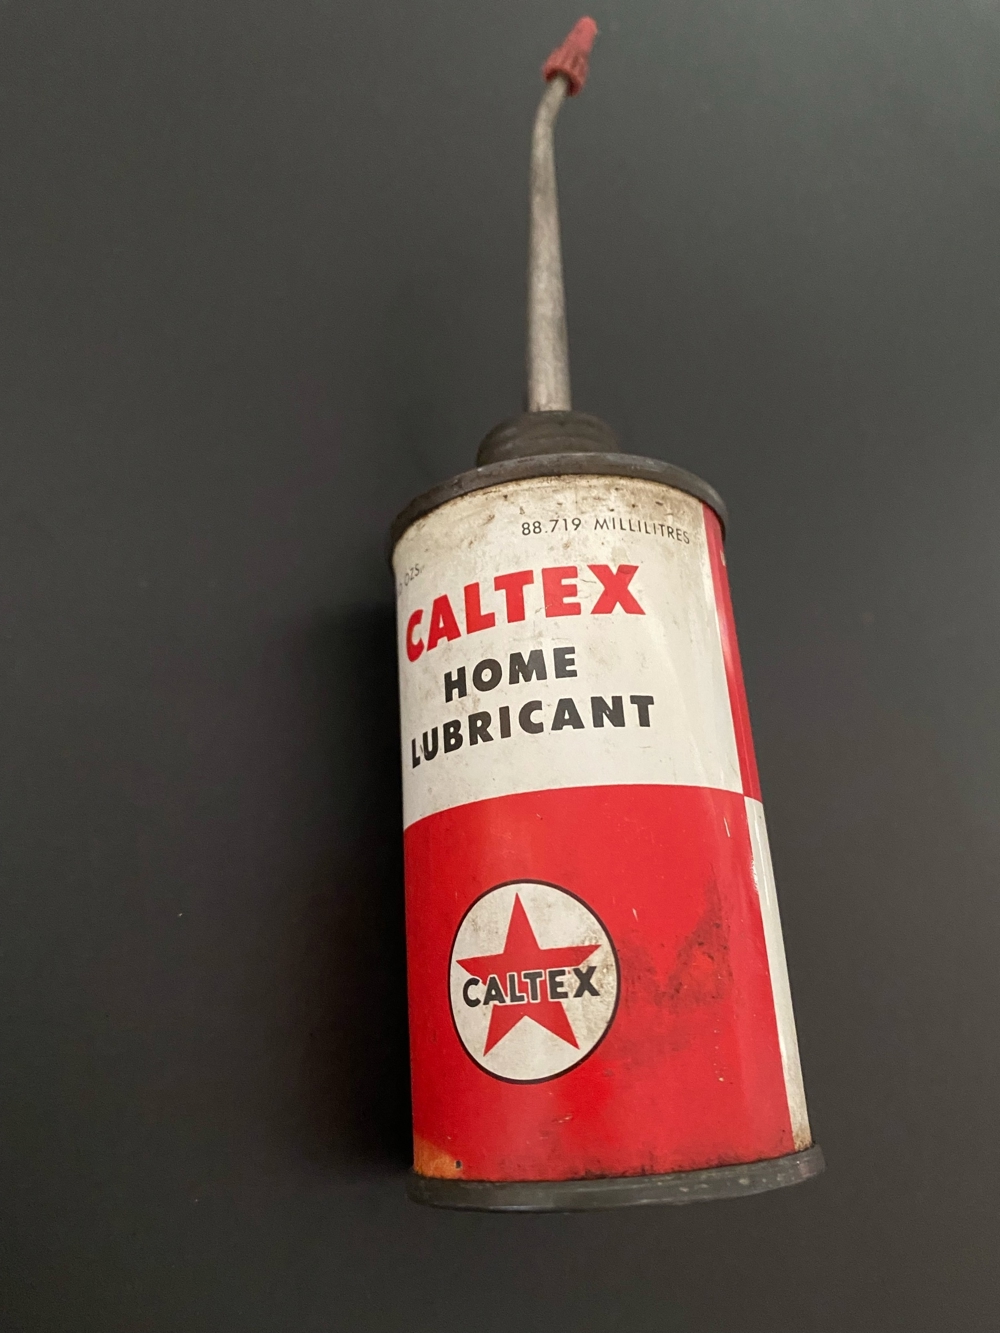 Caltex Home Lubricant 1960 Vintage Oil Cans